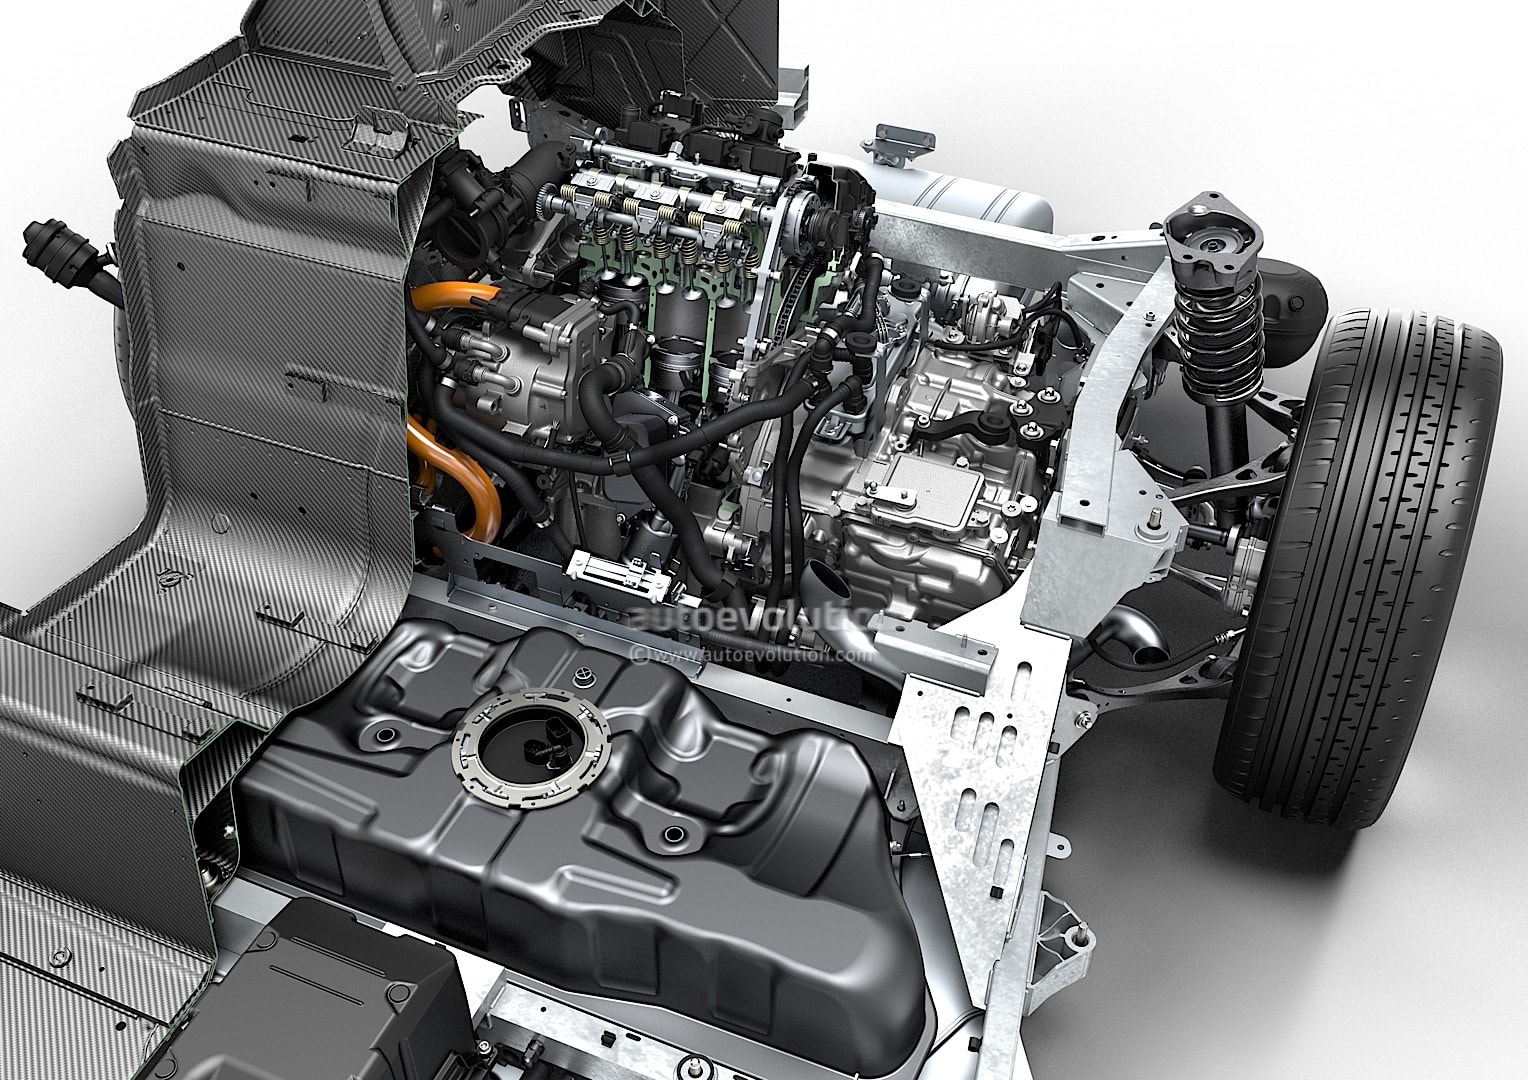 I8 S B38 Engine Will Have Biggest Specific Output For Any Bmw 66254 1 